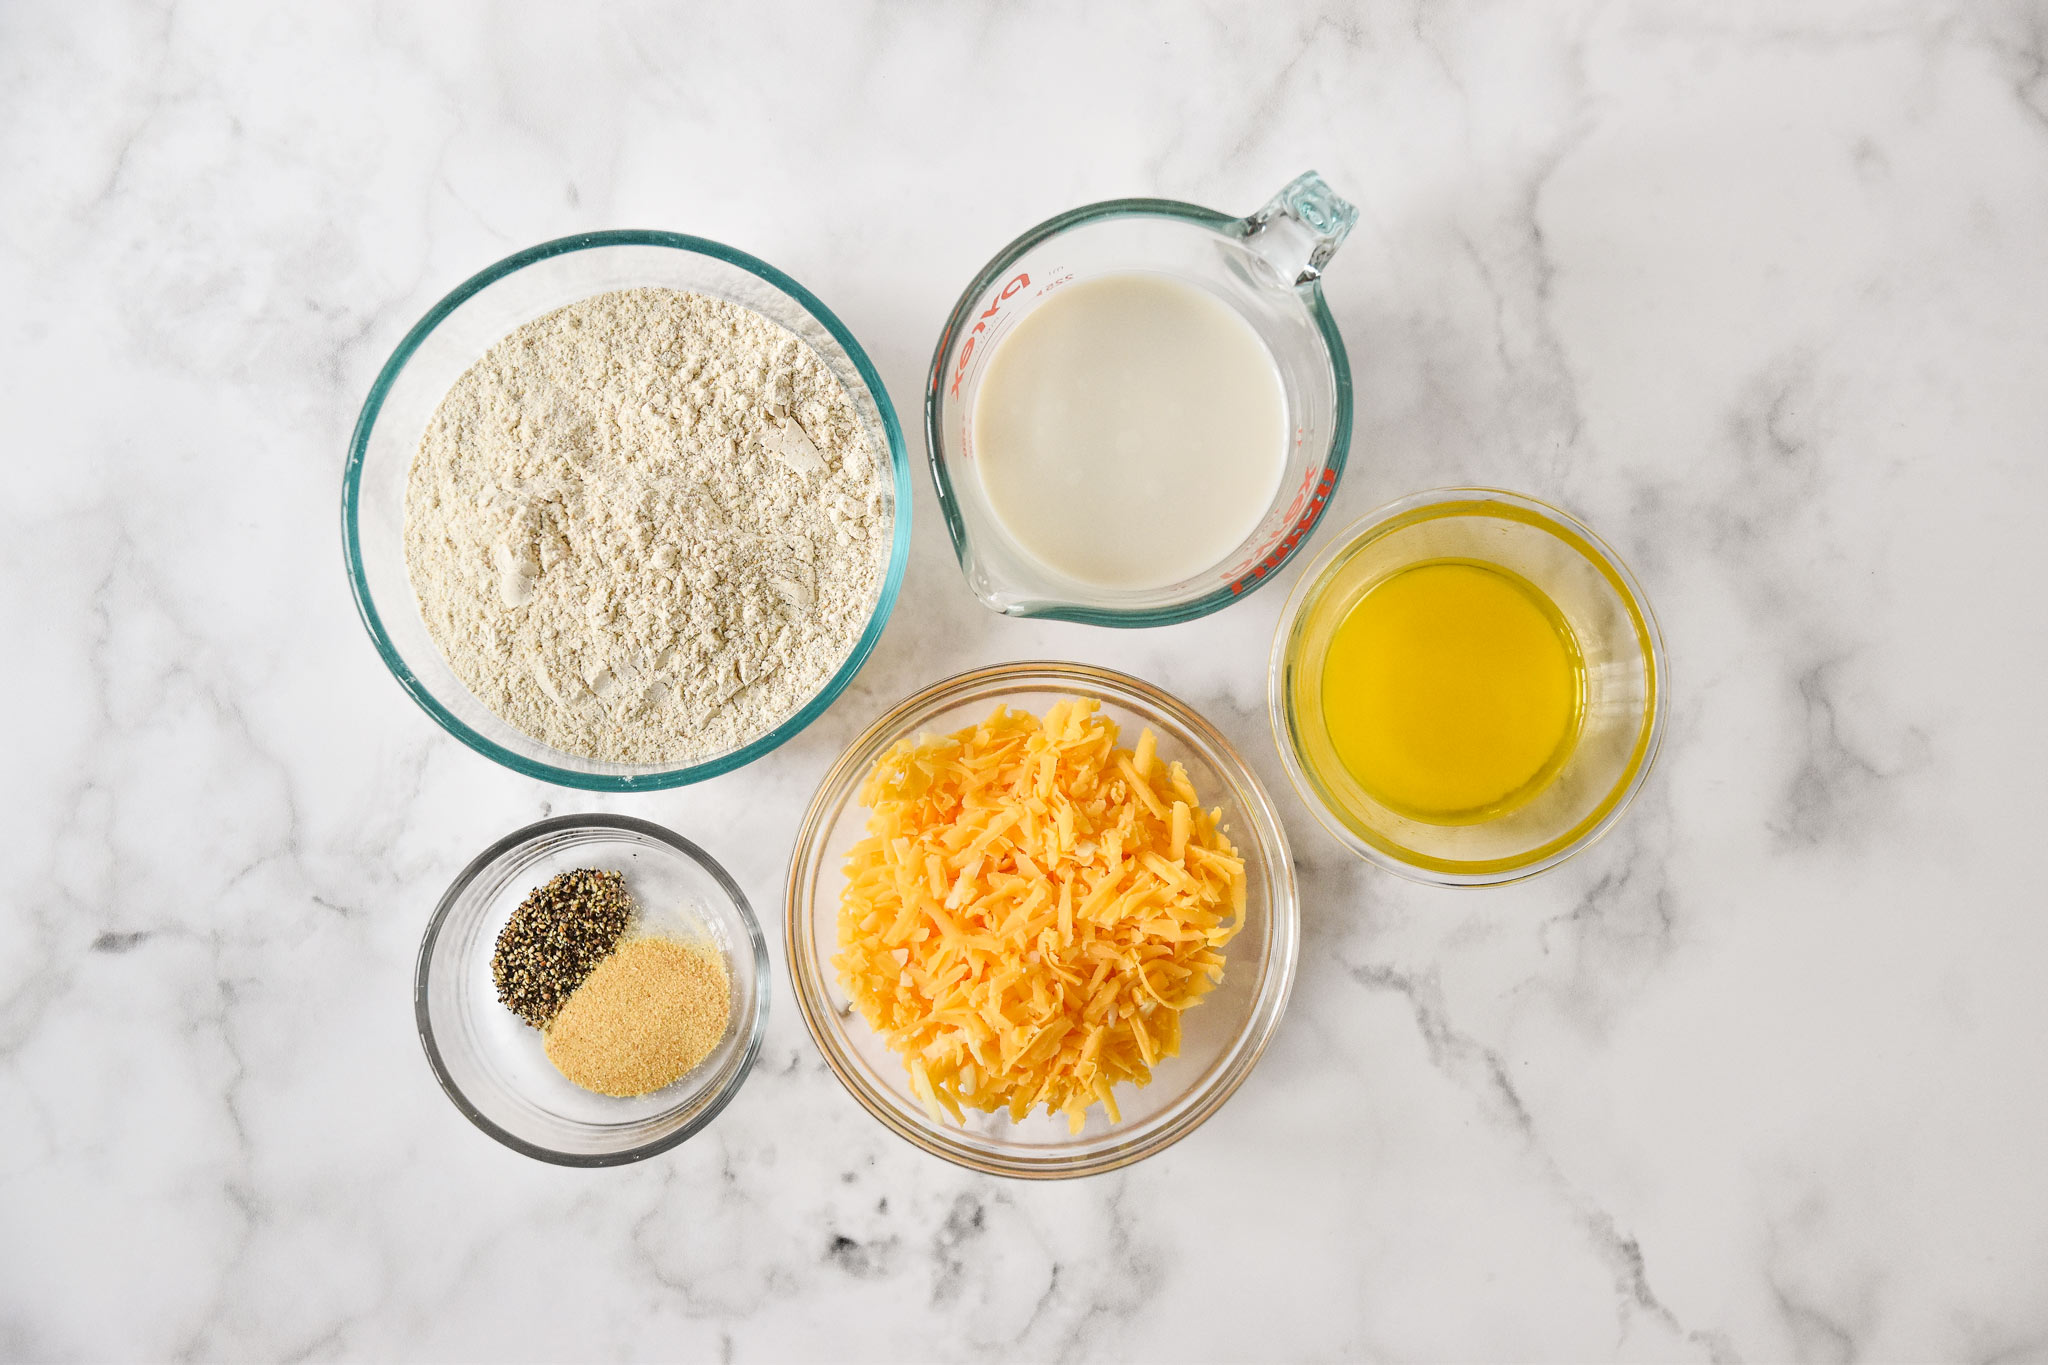 ingredients in separate bowls for the pancake mix cheddar drop biscuits.